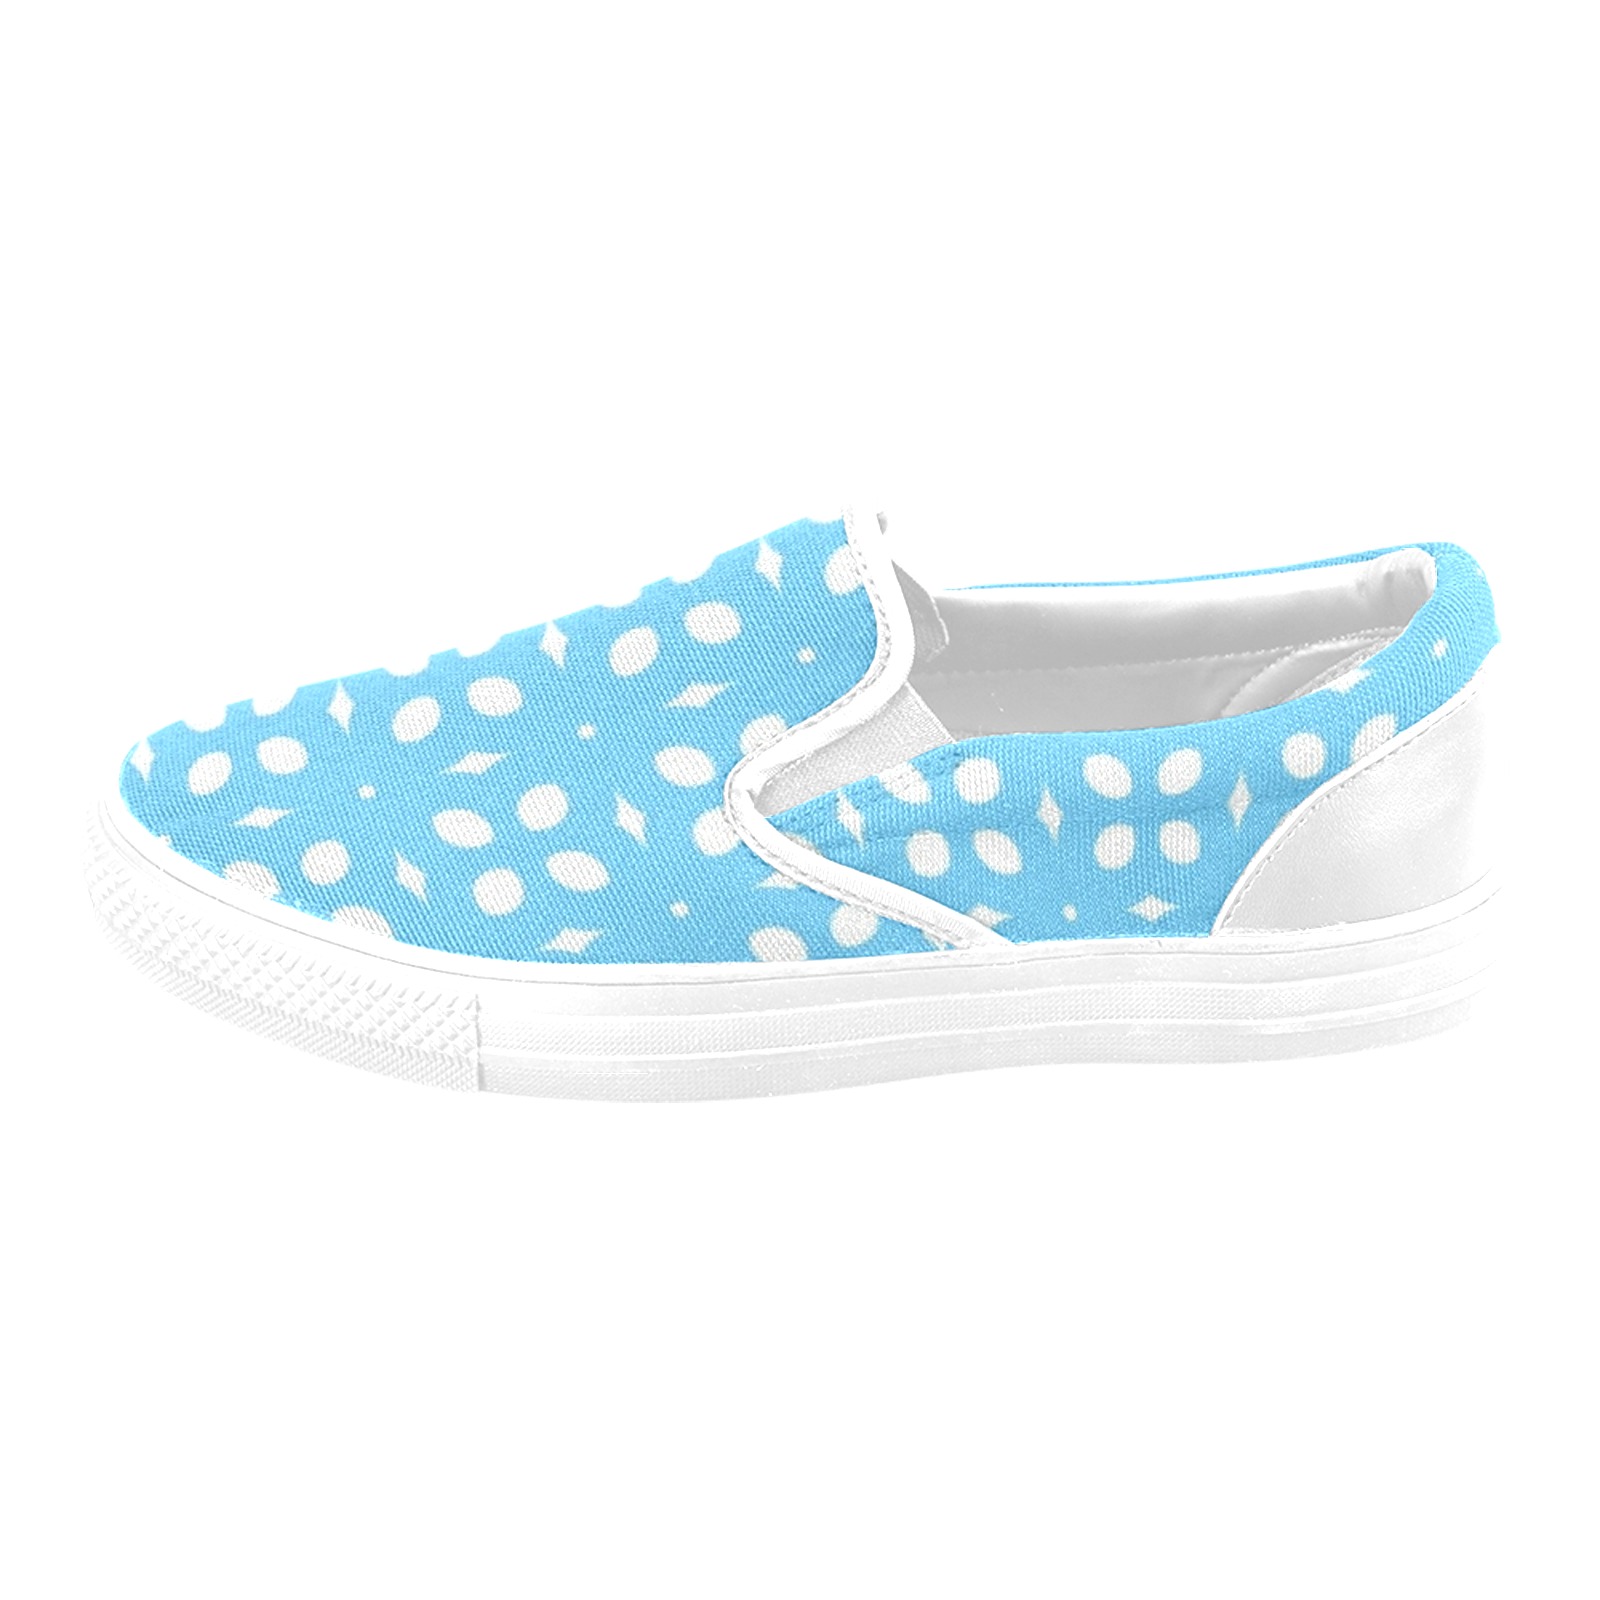 Pastel Blue Abstract 1 Women's Unusual Slip-on Canvas Shoes (Model 019)